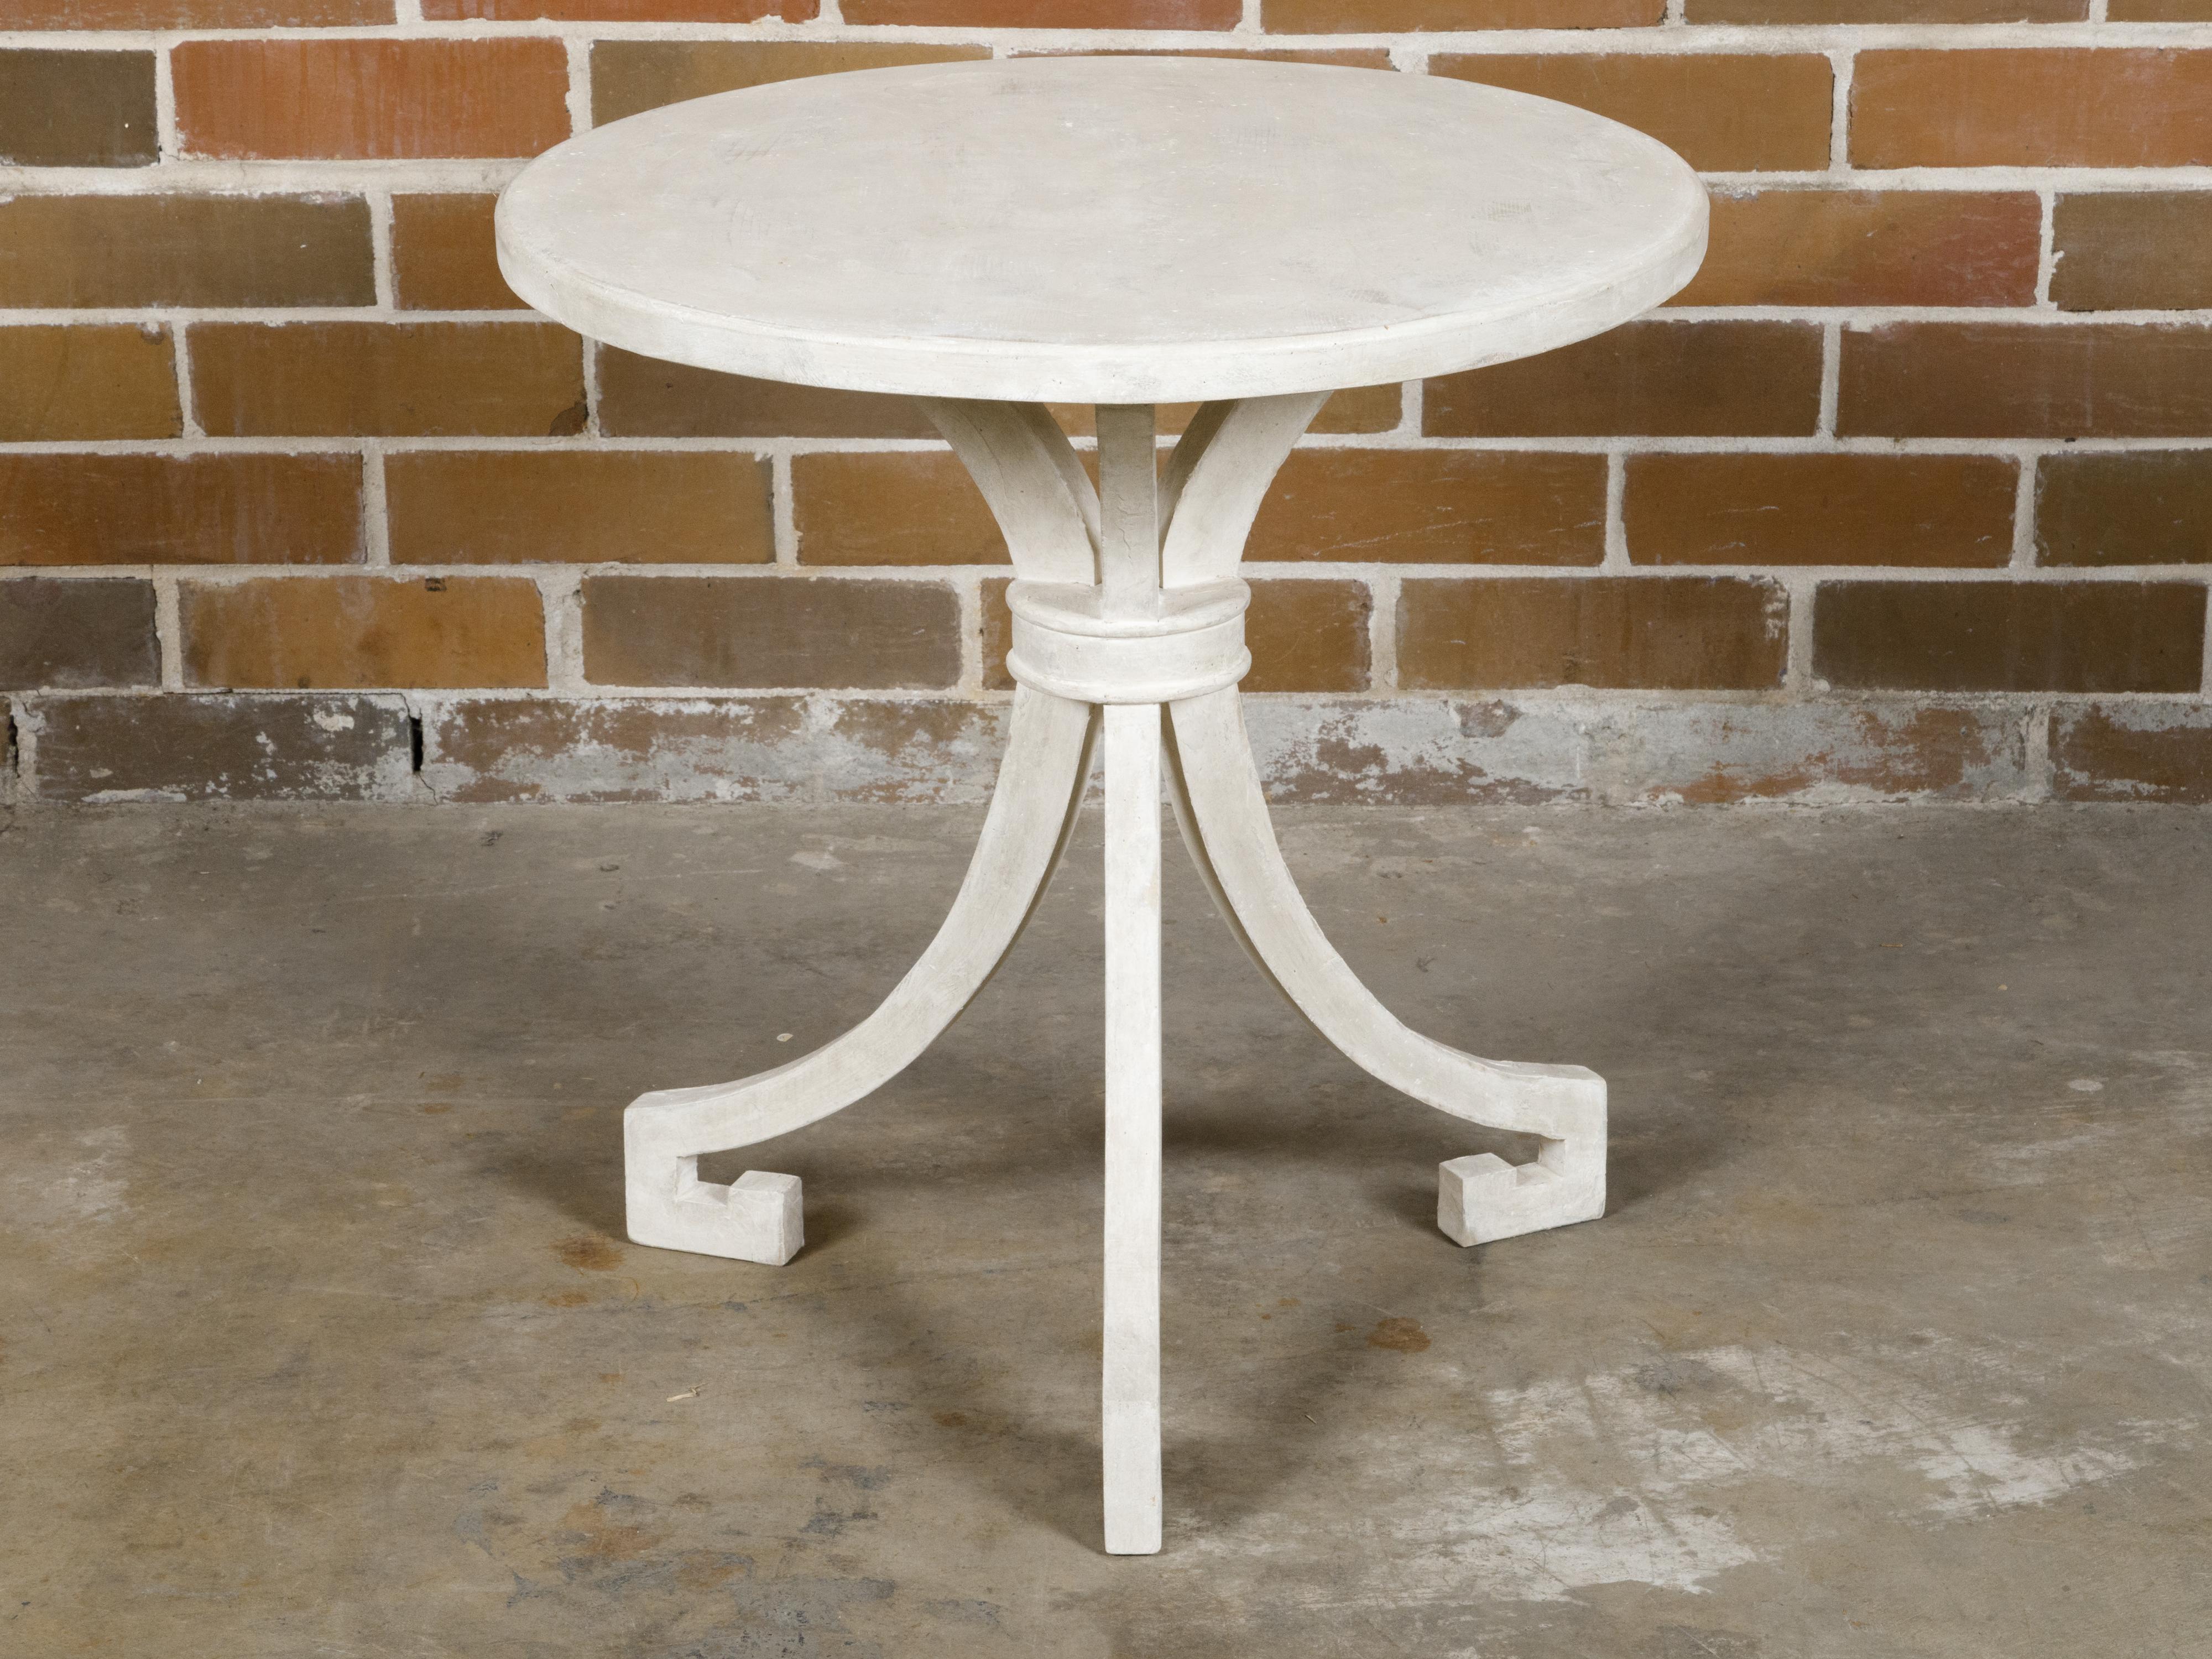 An Italian wooden side table with white painted finish, round top and tripod base. Capturing the essence of Italian craftsmanship, this vintage side table features a round top painted in a serene white finish, supported by a charming tripod base.